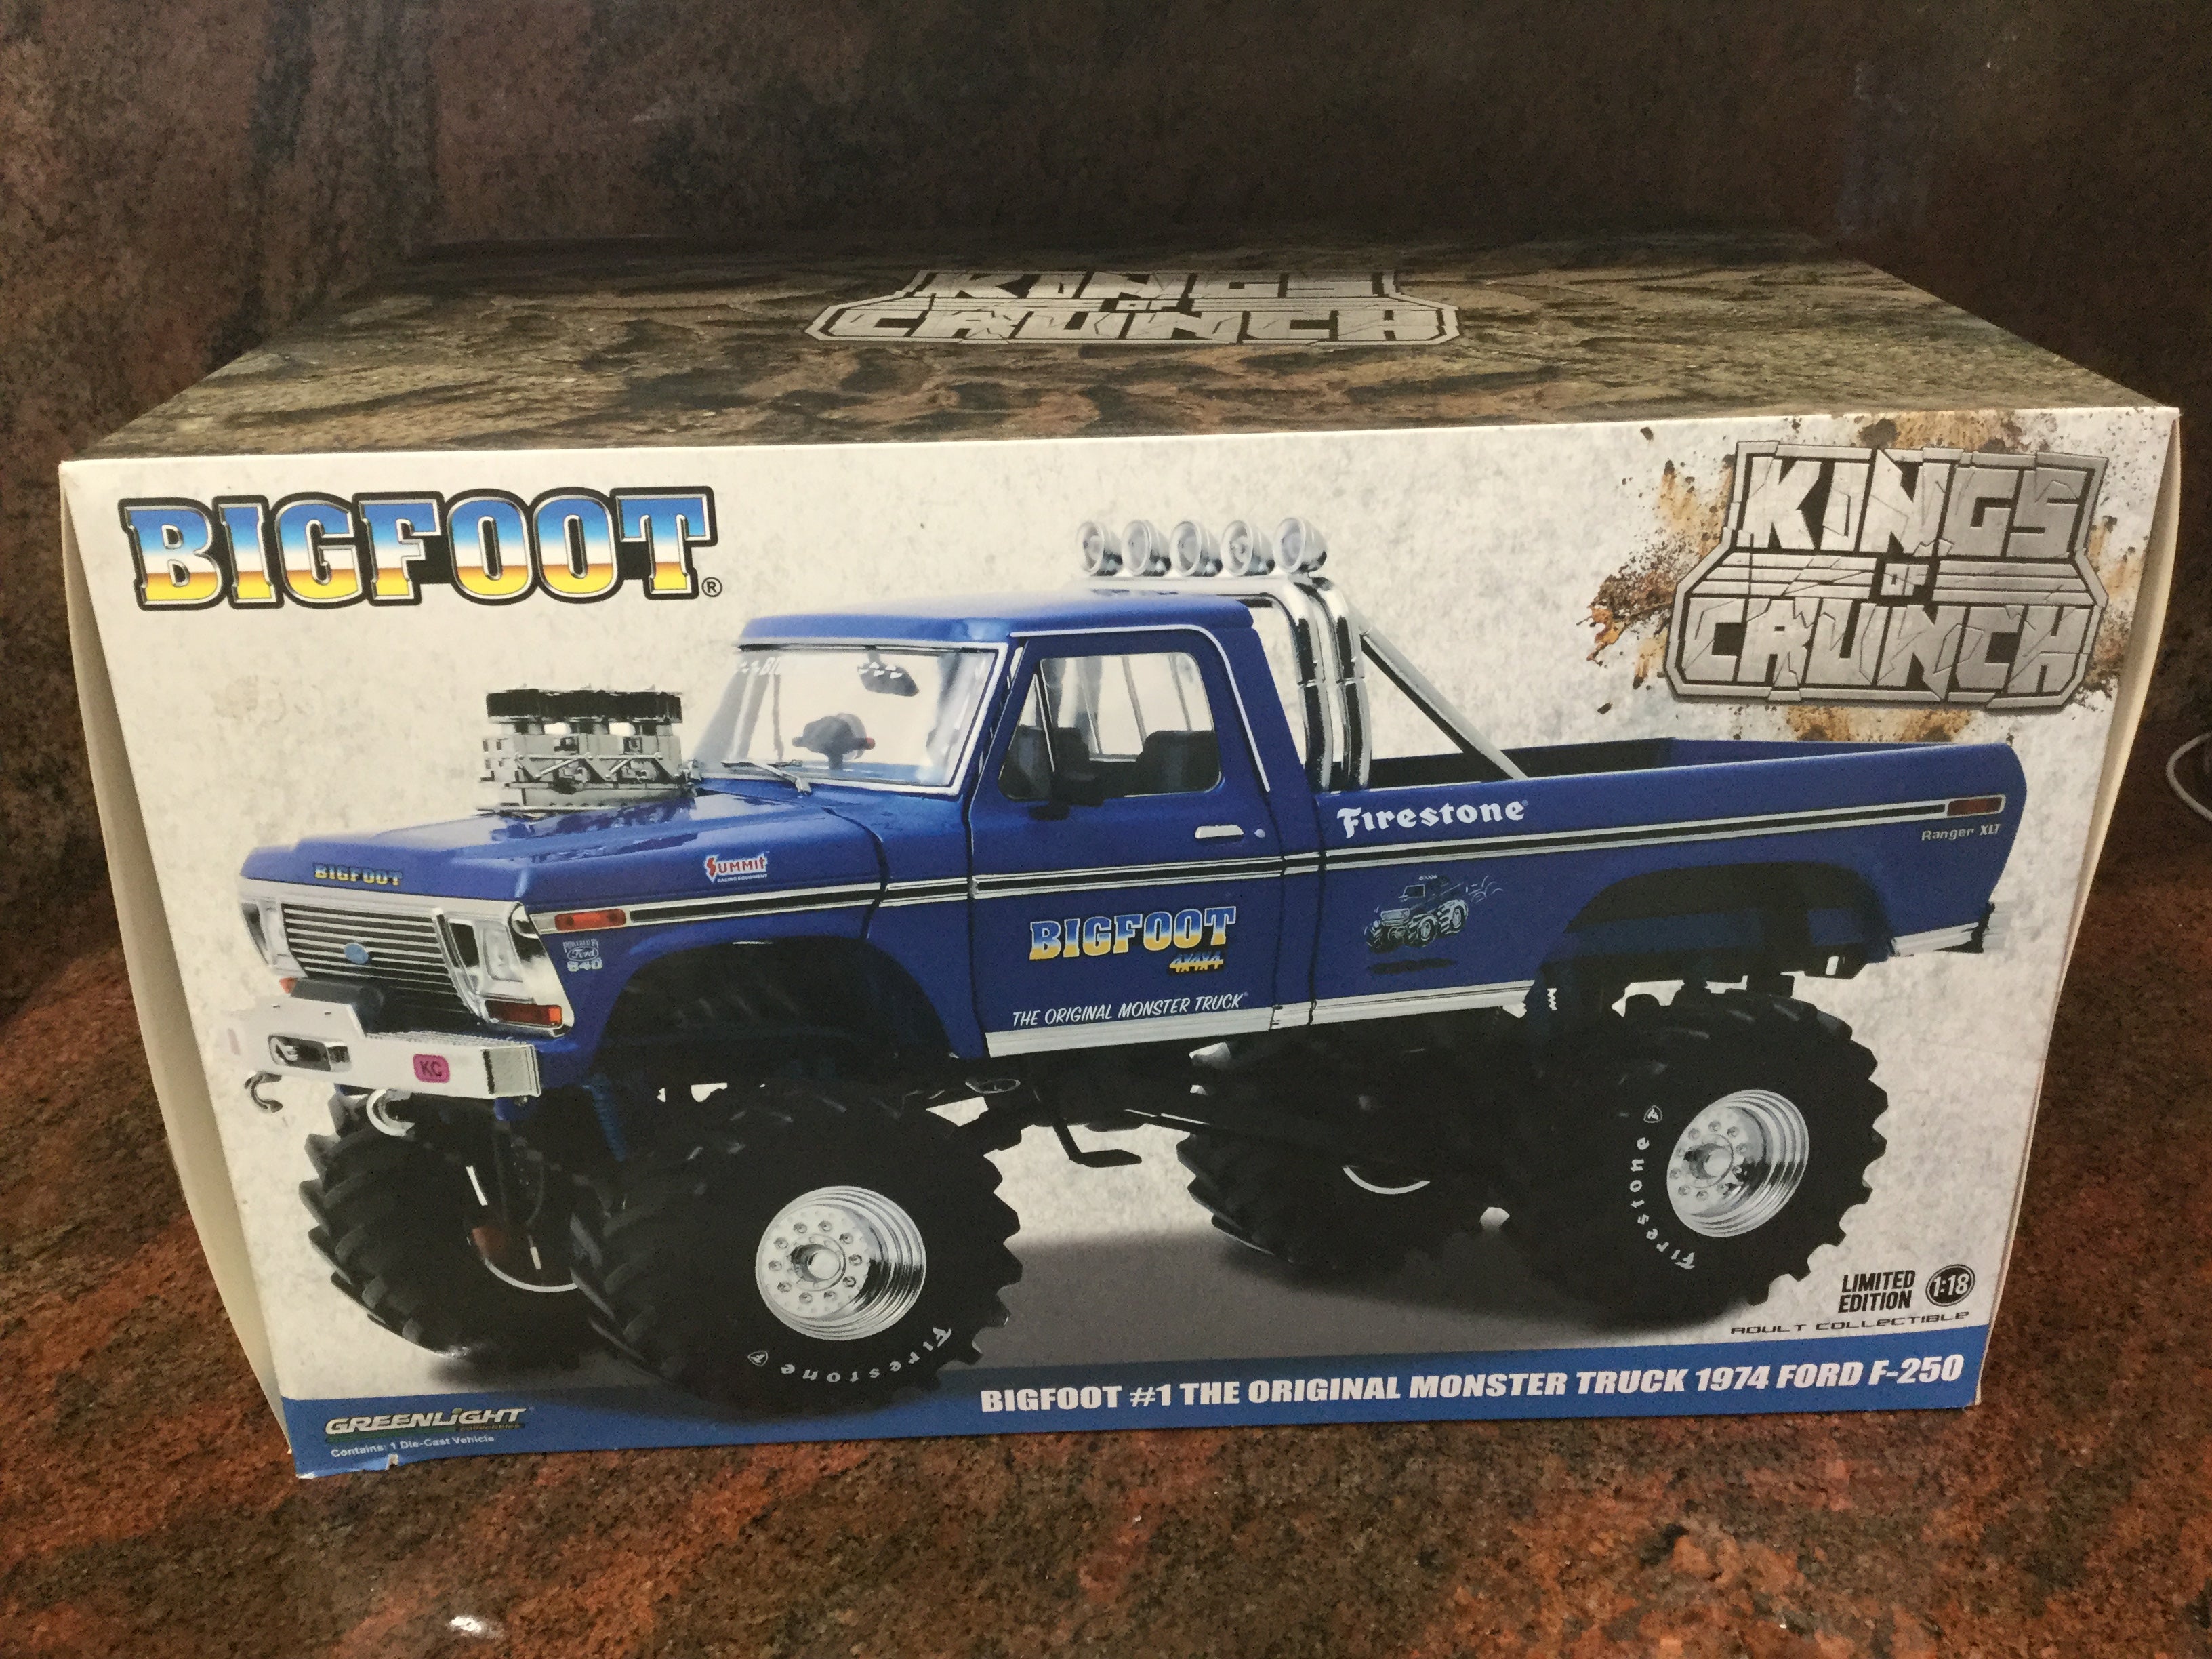 1/18 1974 Ford F-250 Bigfoot #1 The Original Monster Truck with 48 inch  Tires